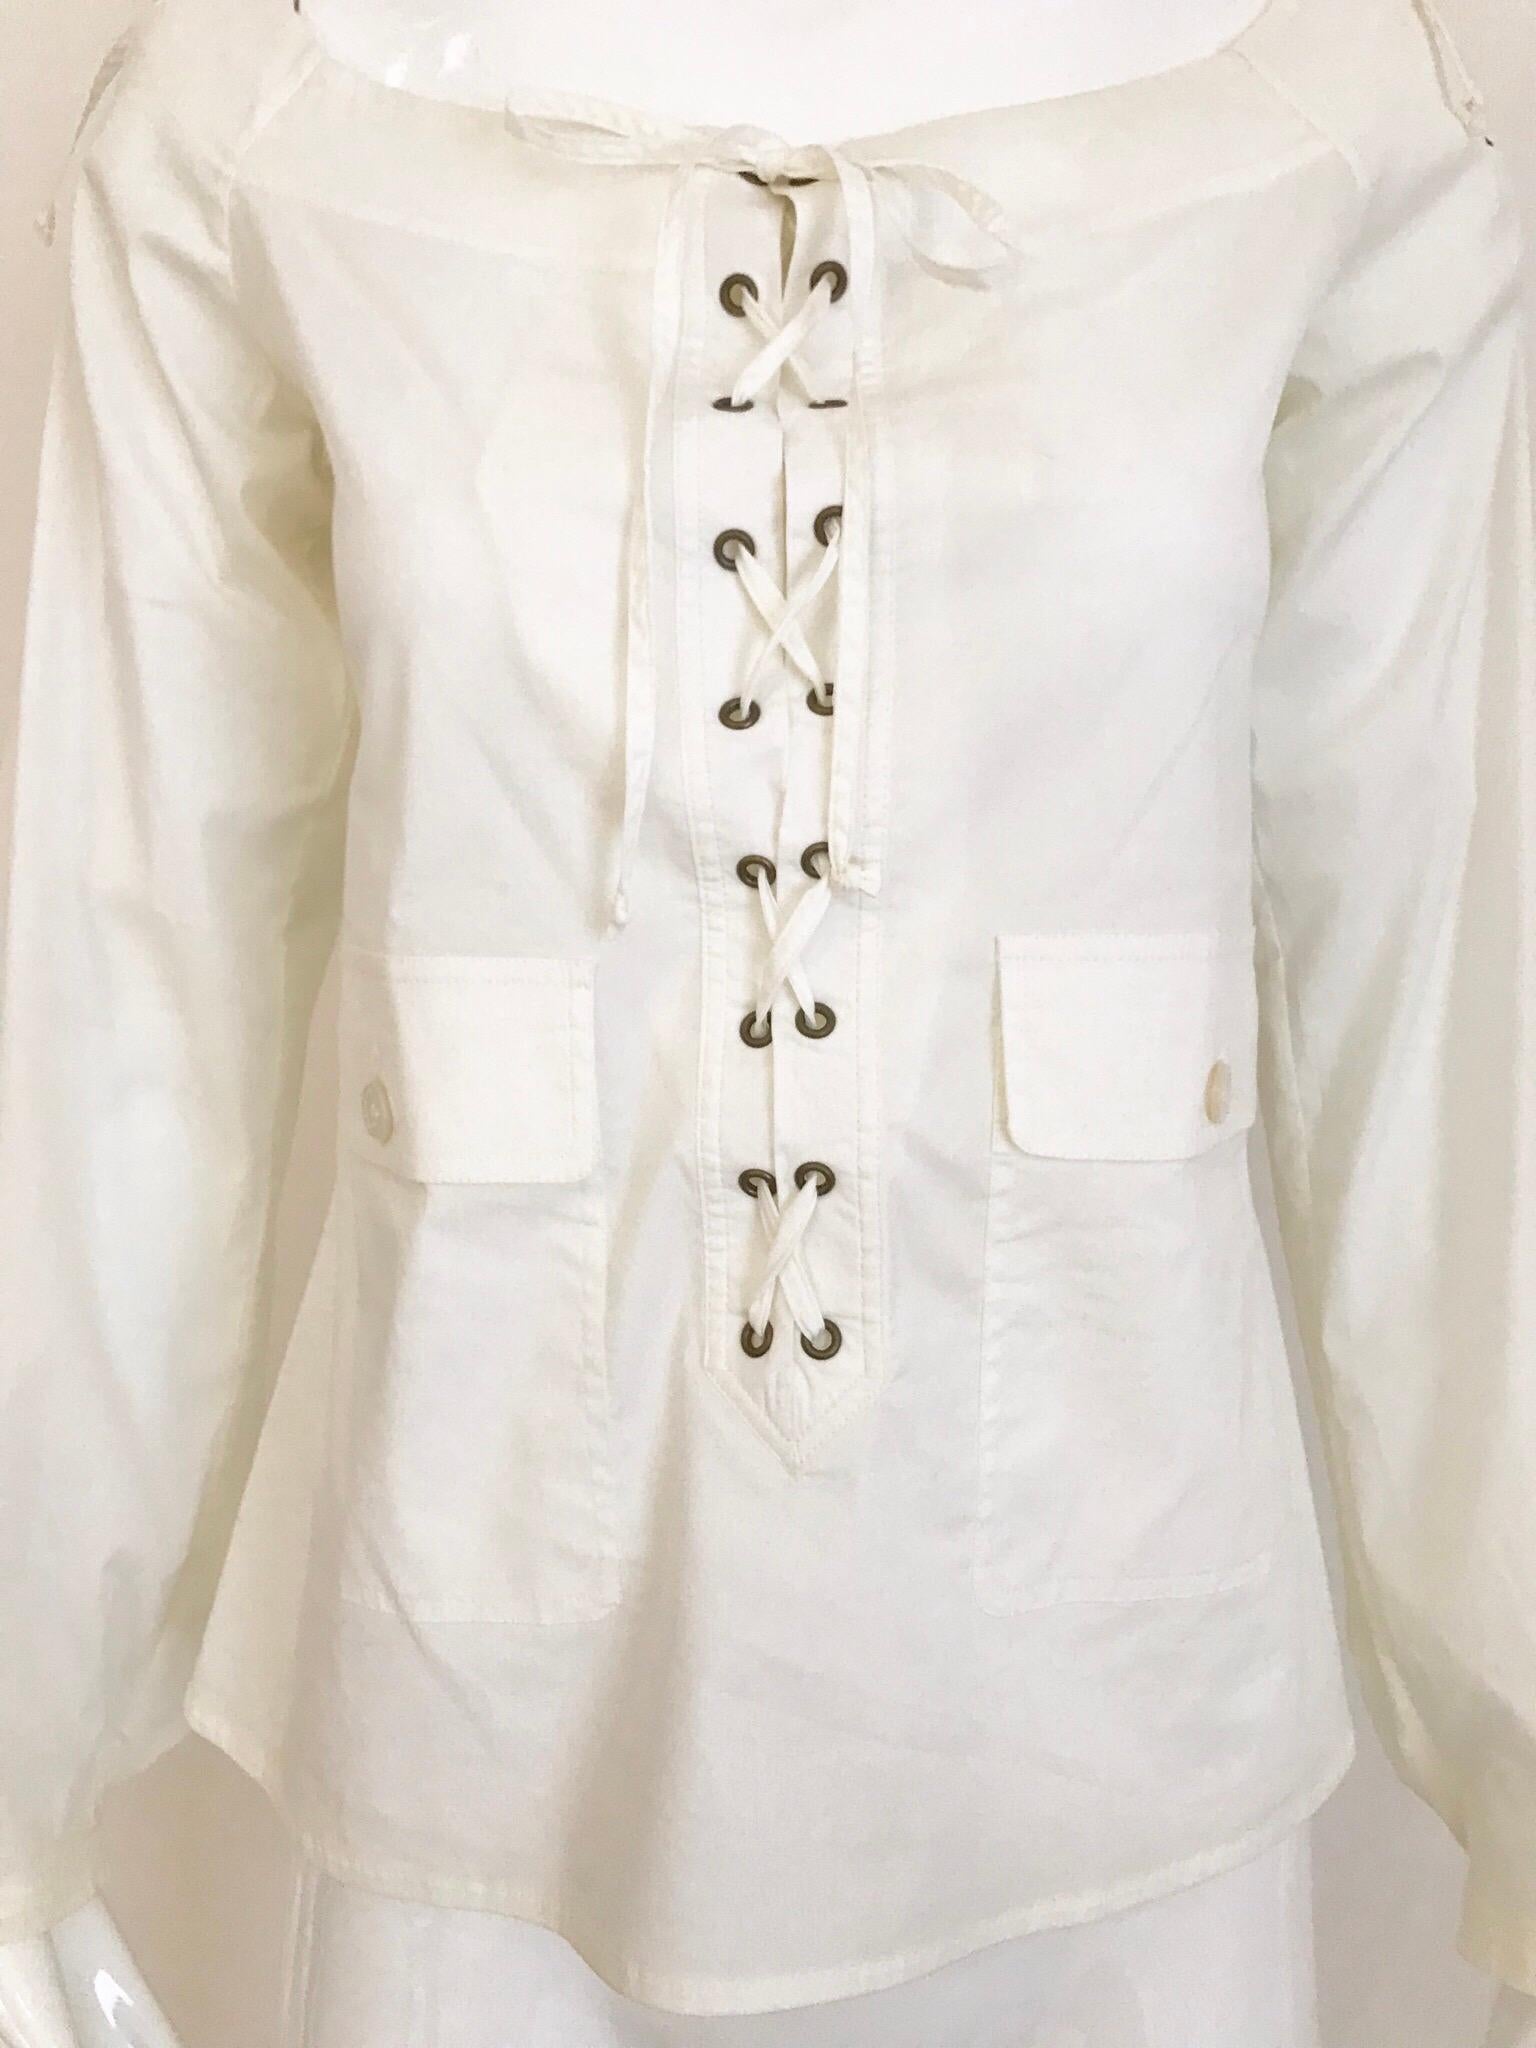 2000s YSL white cotton off shoulder lace up blouse designed by  Tom Ford.
Size: 38F/ Small - Medium
Bust: 36 inches / Blouse length: 22 inches
Blouse has some stretch and adjustable.
Garment has been professionally Dry Cleaned and Ready to wear.
